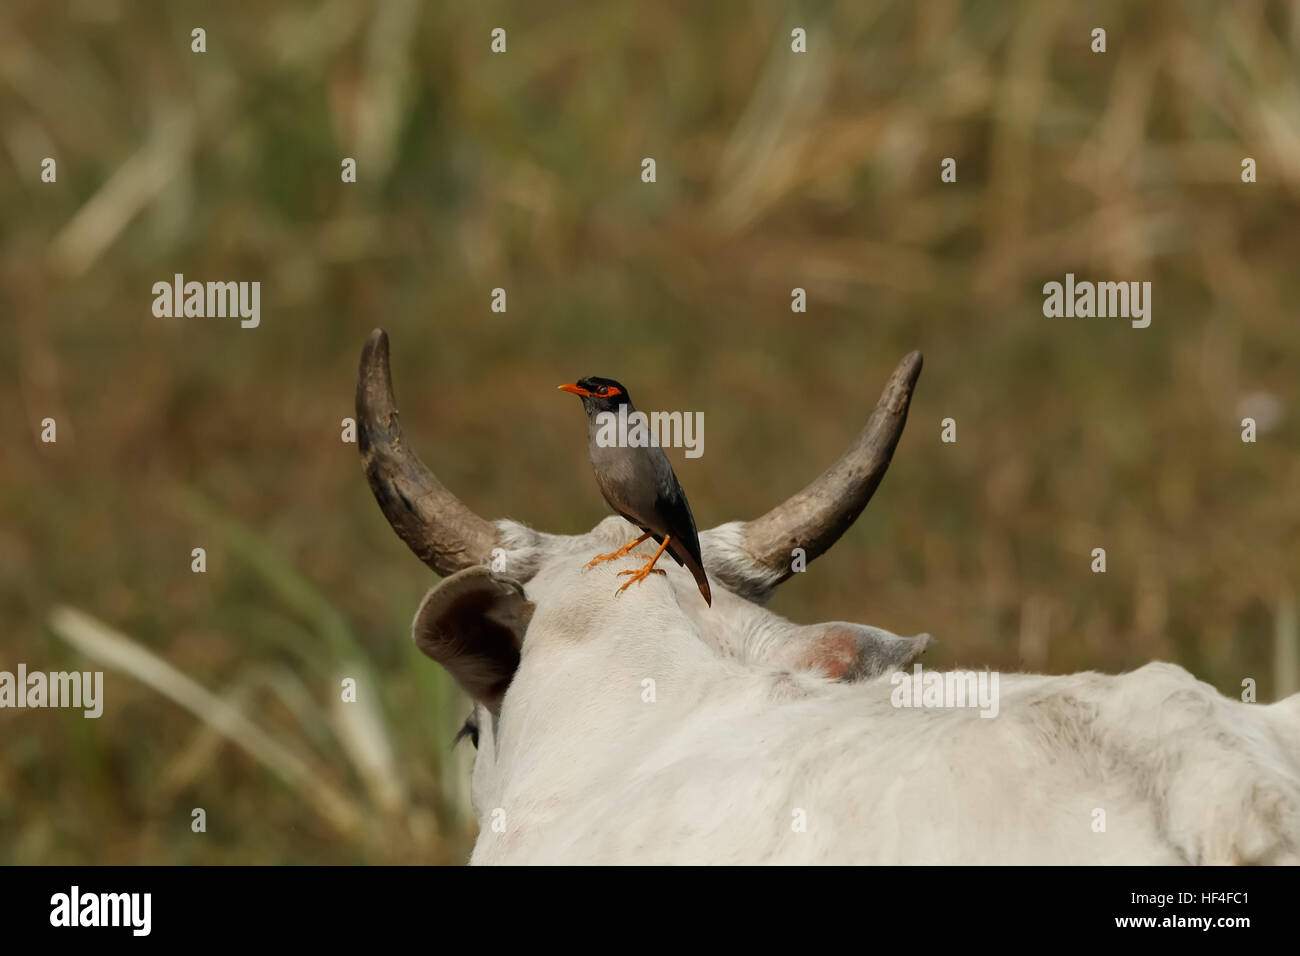 Bank Myna; Acridotheres ginginianus on the top of a cow Stock Photo